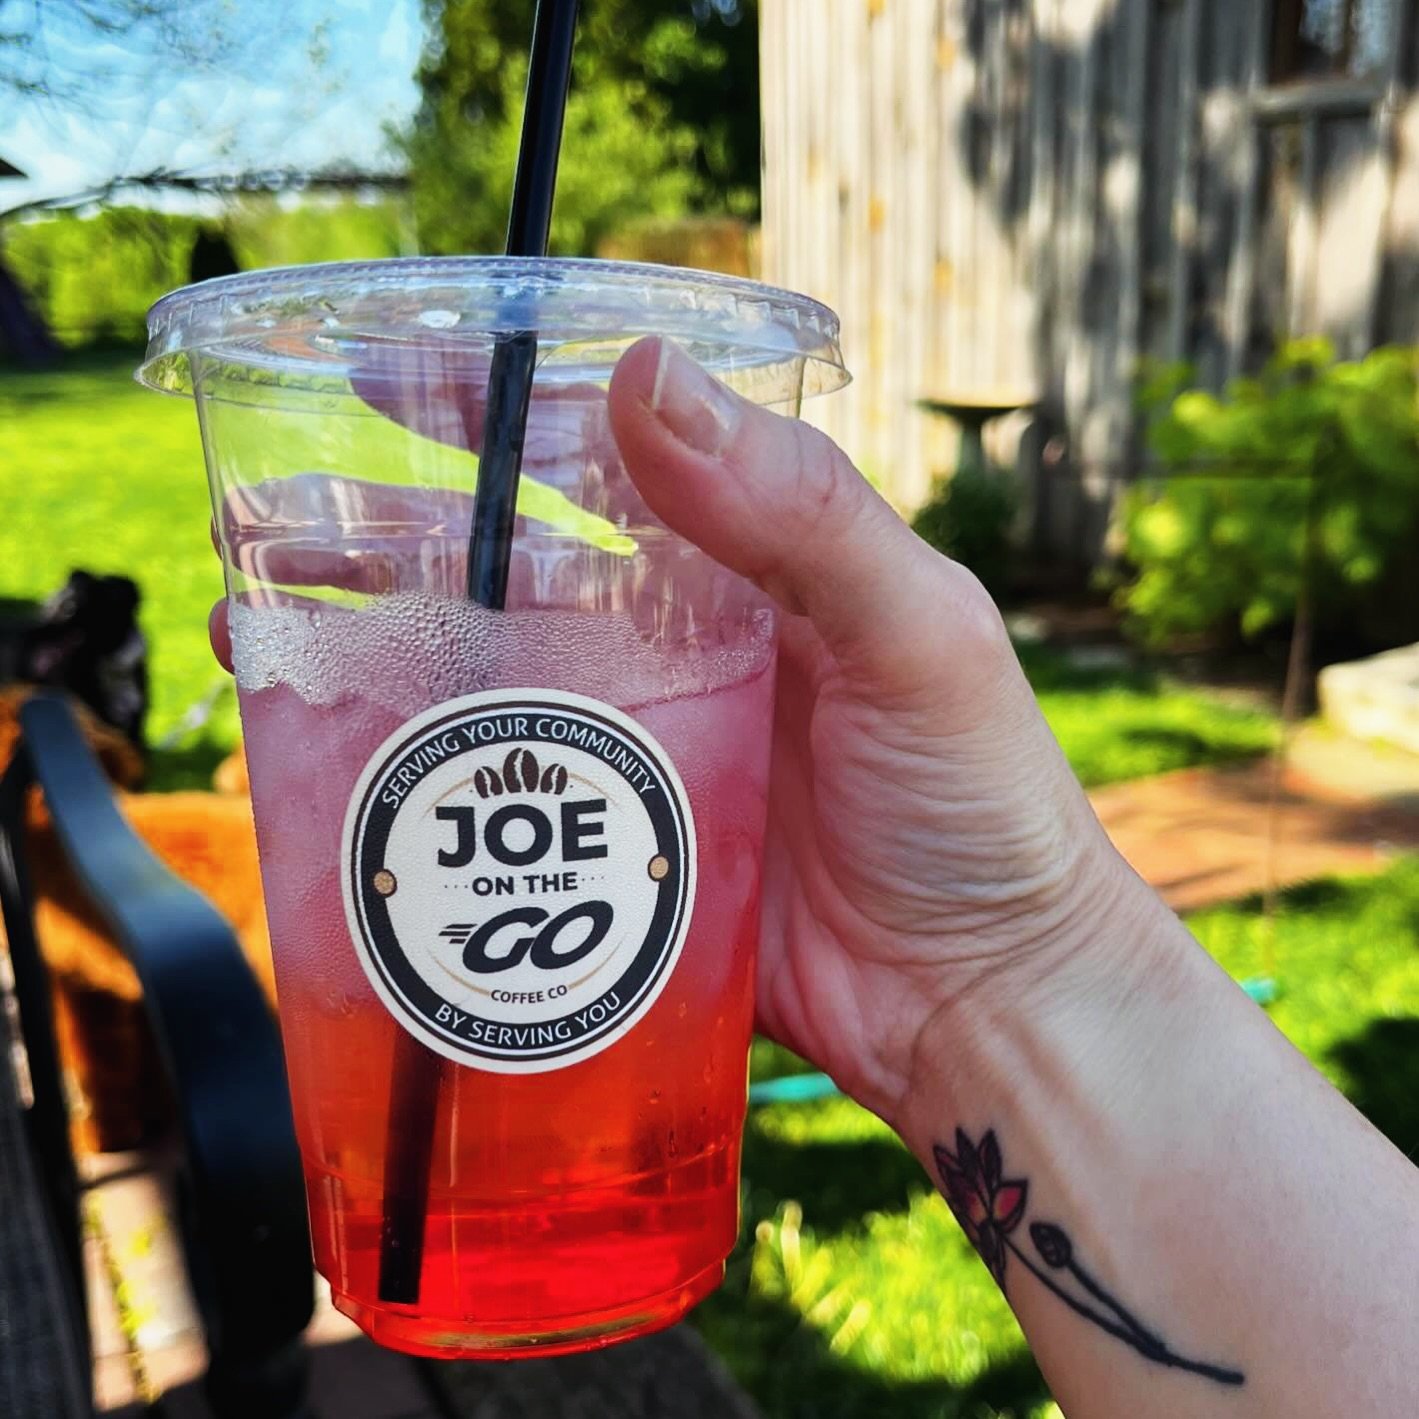 When you order the Lotus to match your lotus! We&rsquo;re fueling sunny afternoons in Strasburg and beyond!

We close at 4PM Monday through Friday, so grab your afternoon sips before heading home!

DM us &ldquo;LOTUS&rdquo; to save 10% on your first/